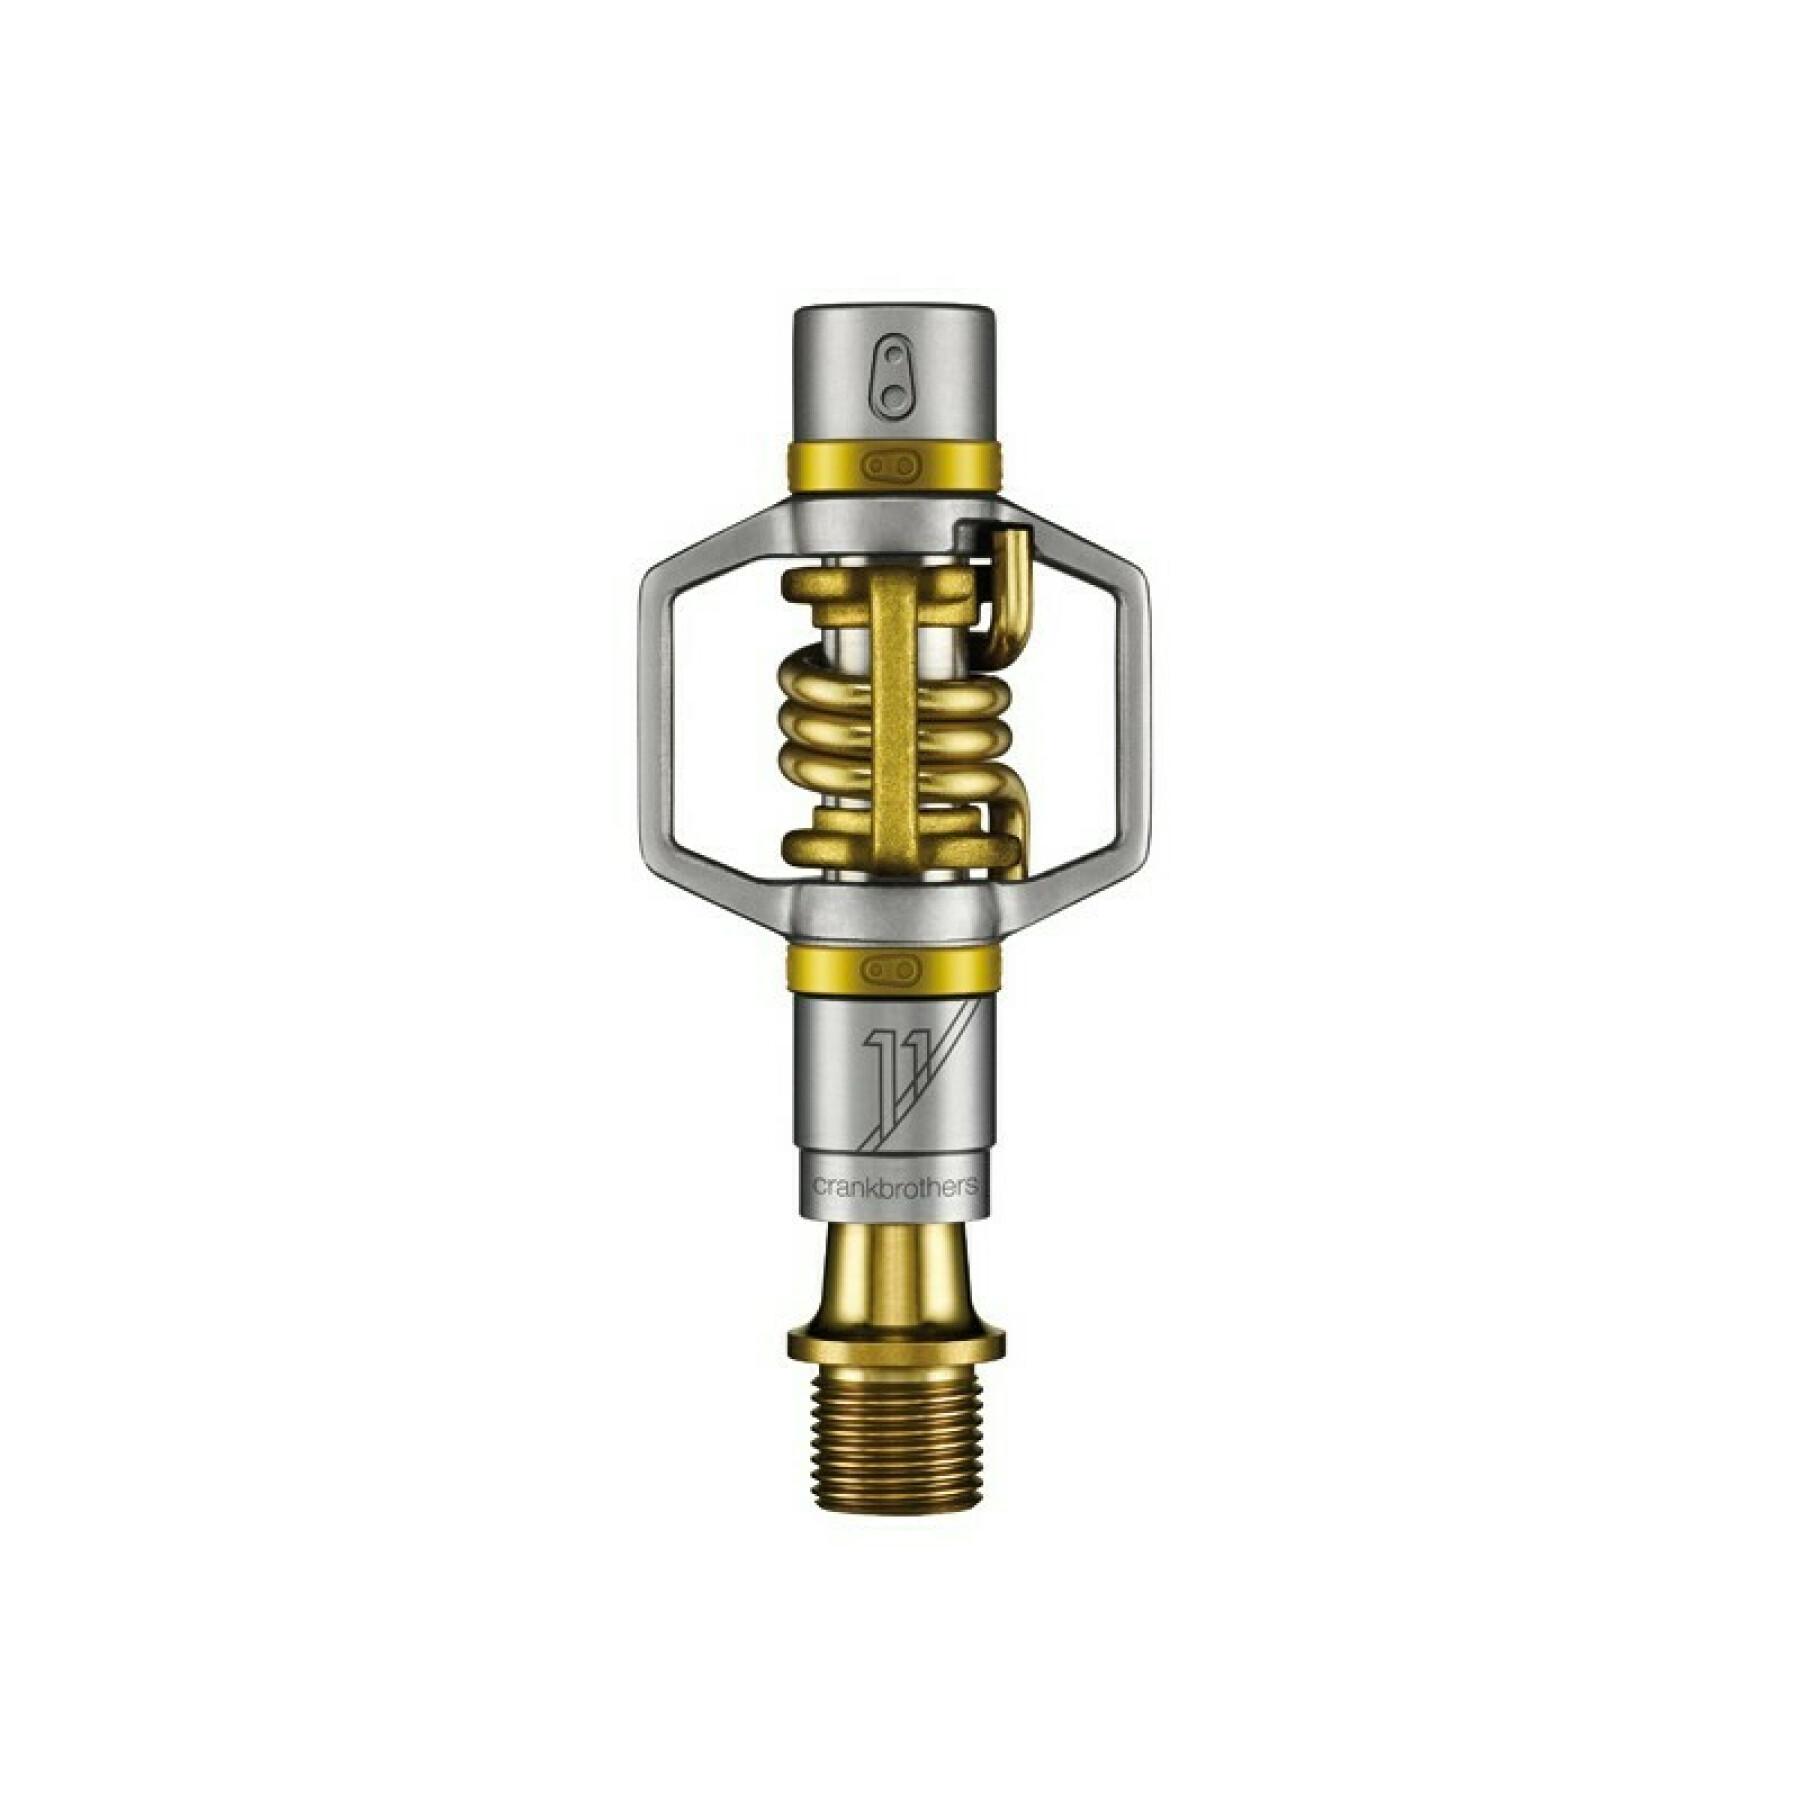 Titan-Pedale crankbrothers egg beater 11